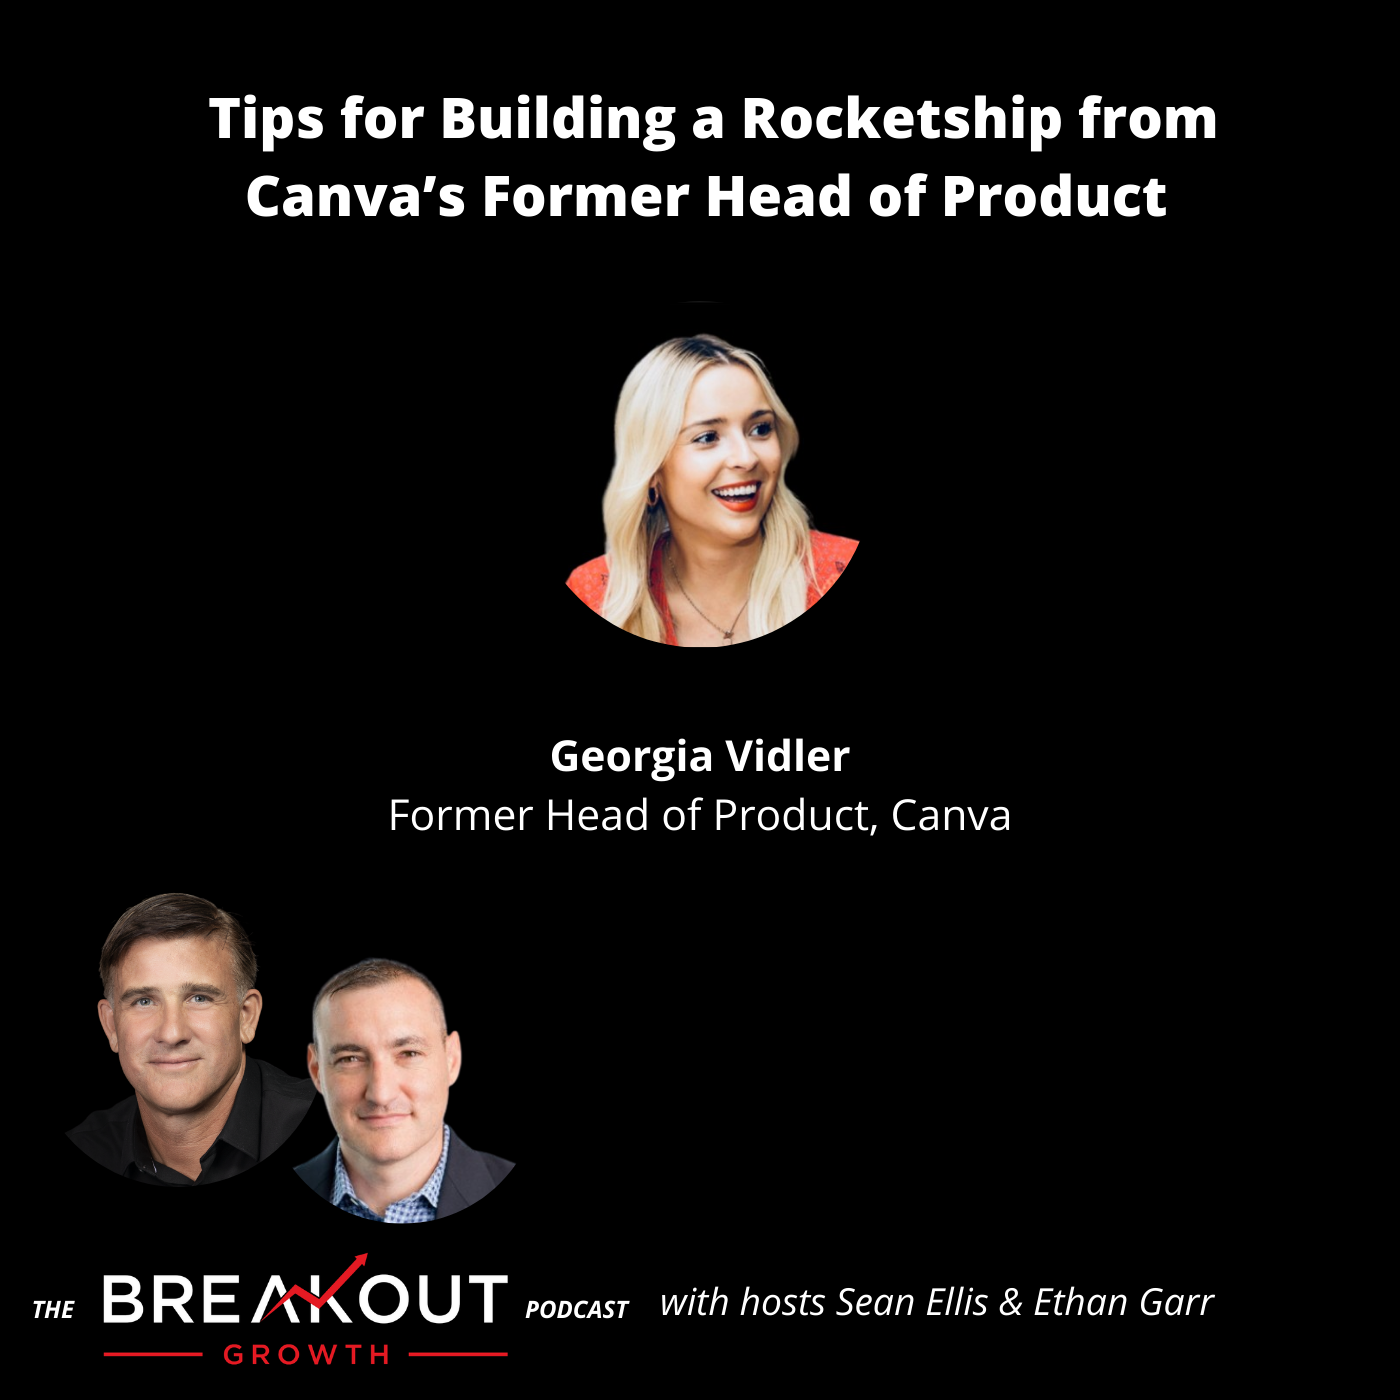 Tips for Building a Rocketship from Canva’s Former Head of Product 